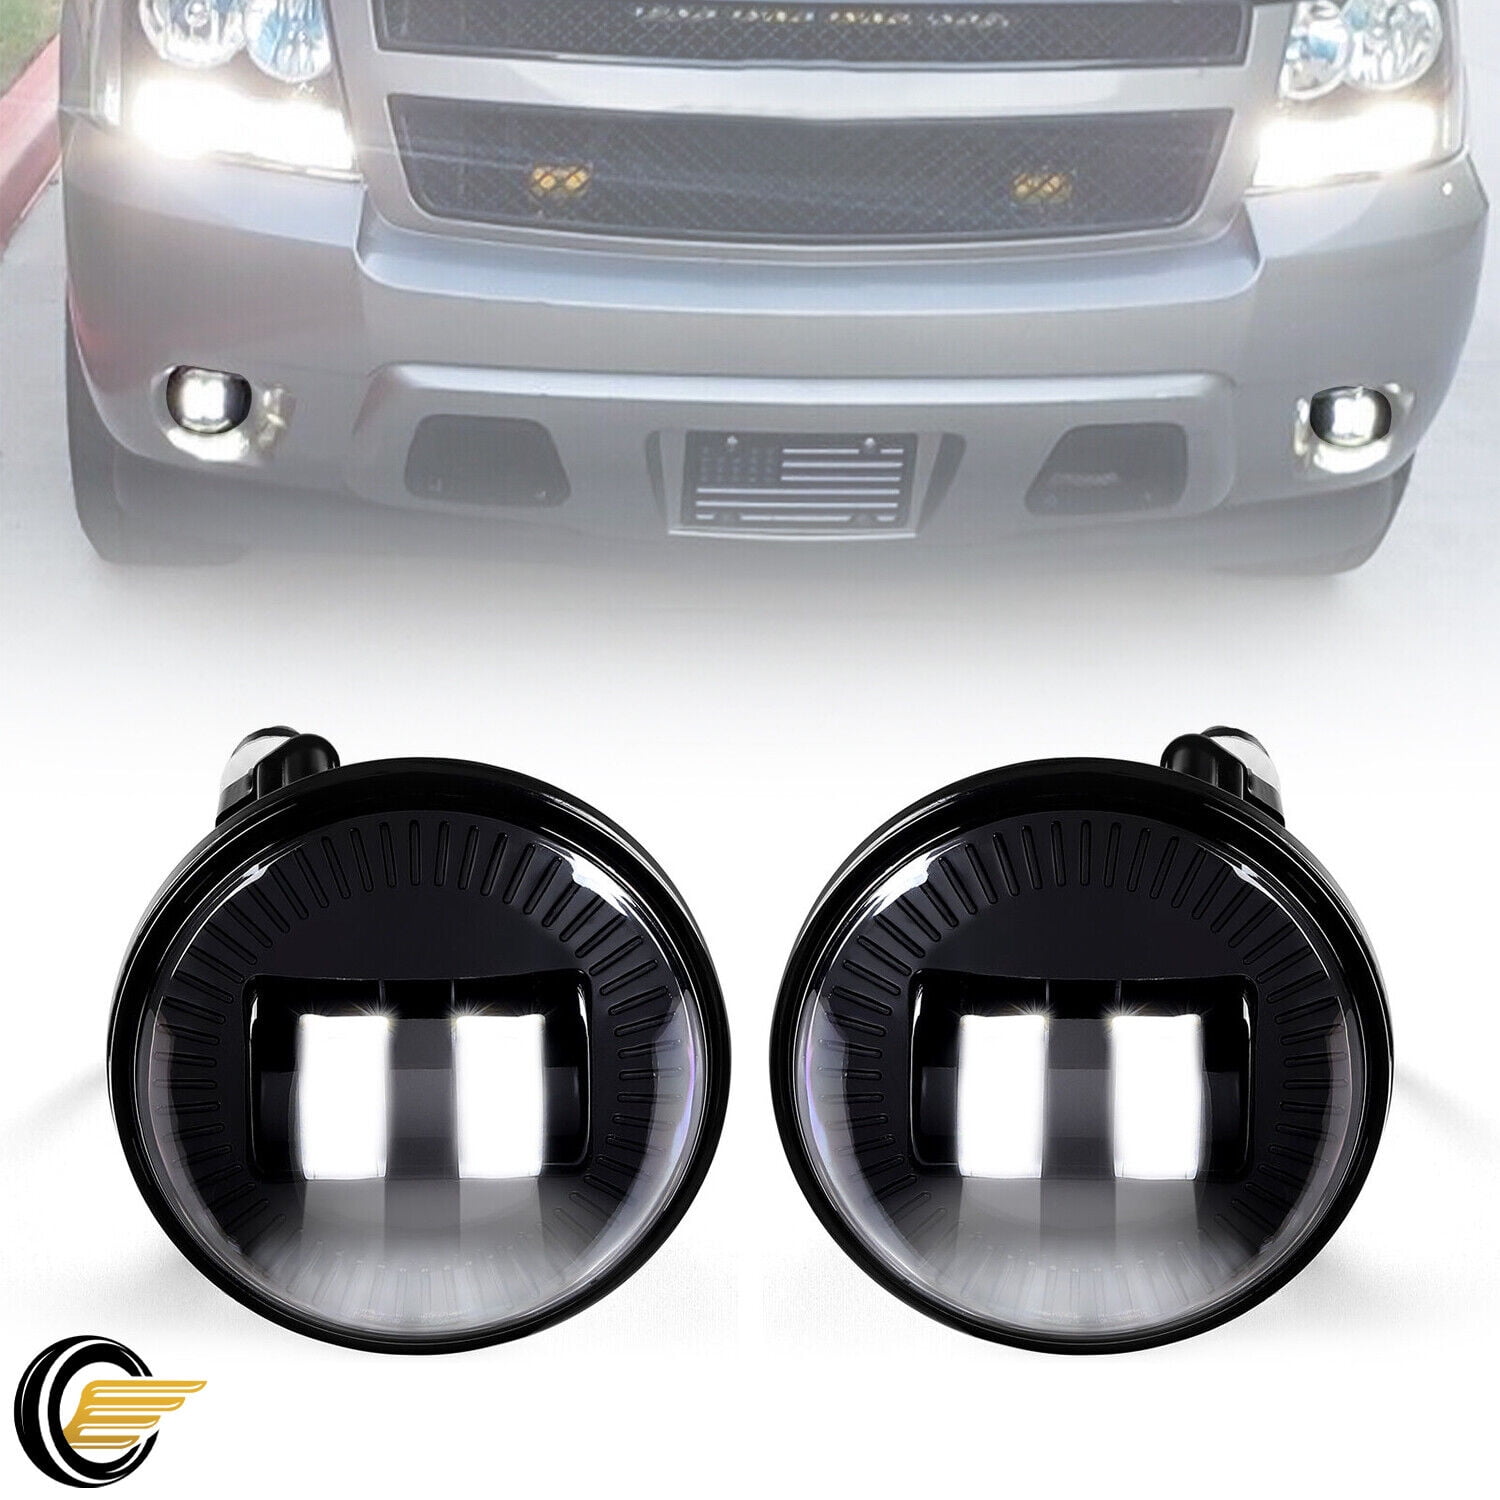 GlowShift 2007-2013 Chevrolet Silverado Duramax Tan Triple Gauge Package  with White Color DS2 Gauge Set